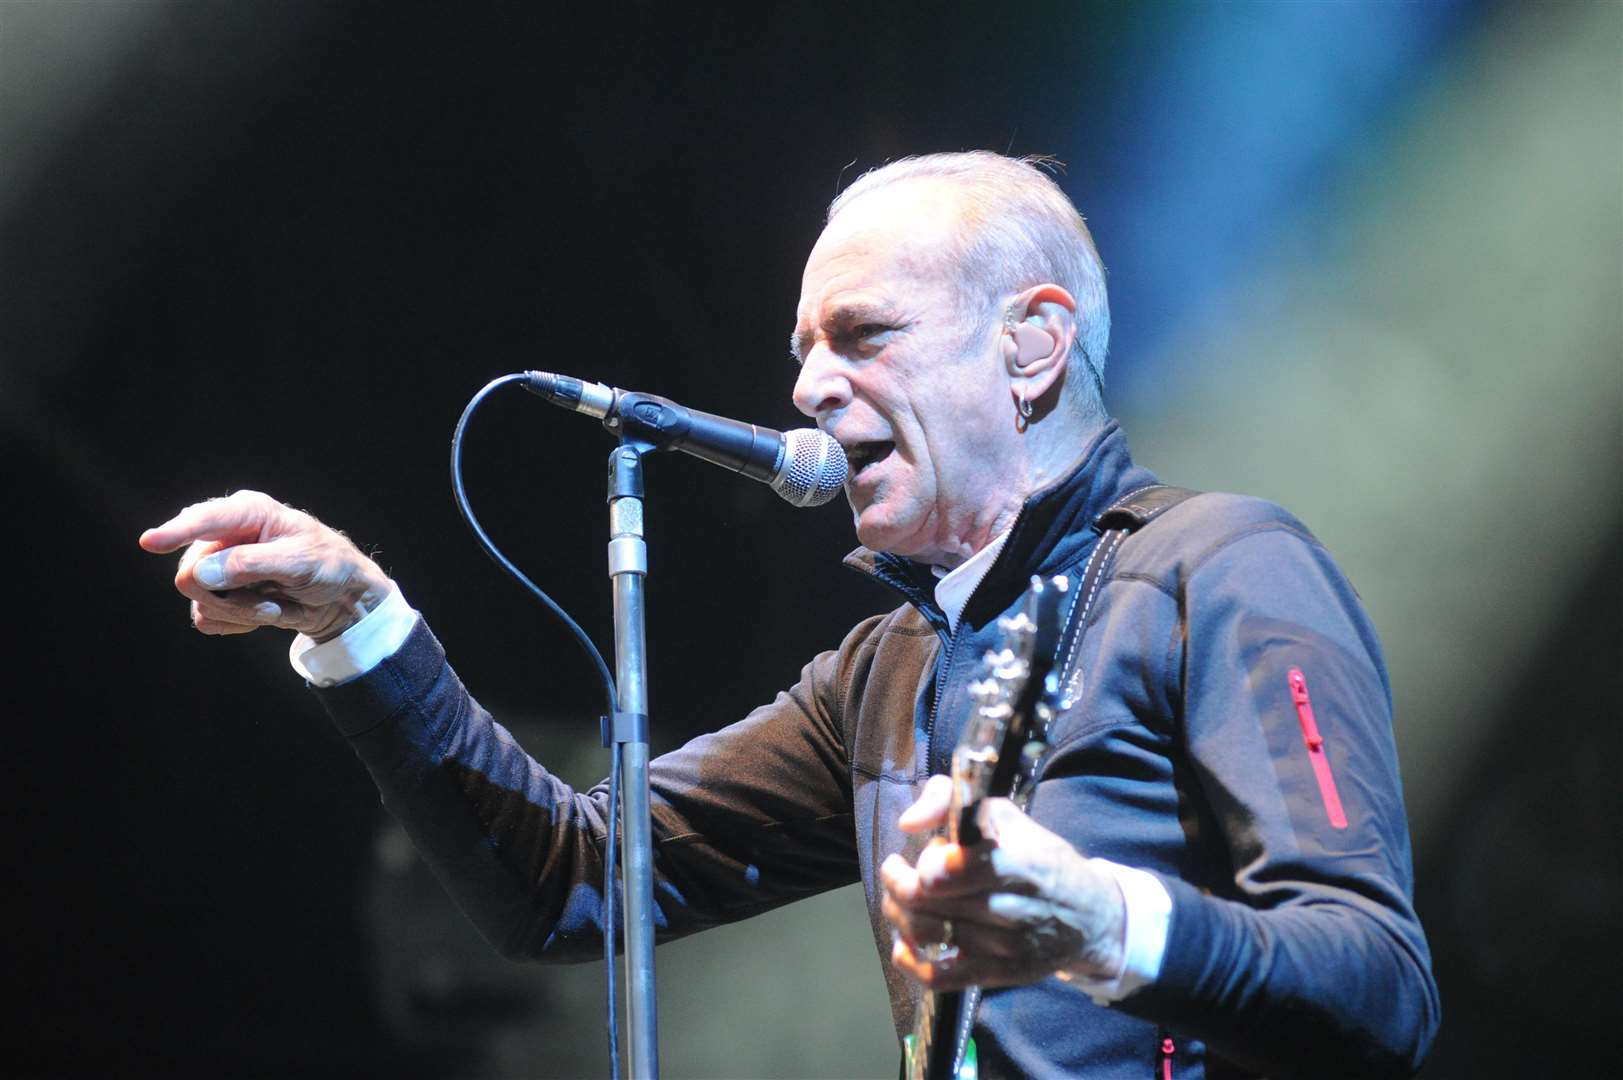 Francis Rossi performs at Status Quo's concert in 2016